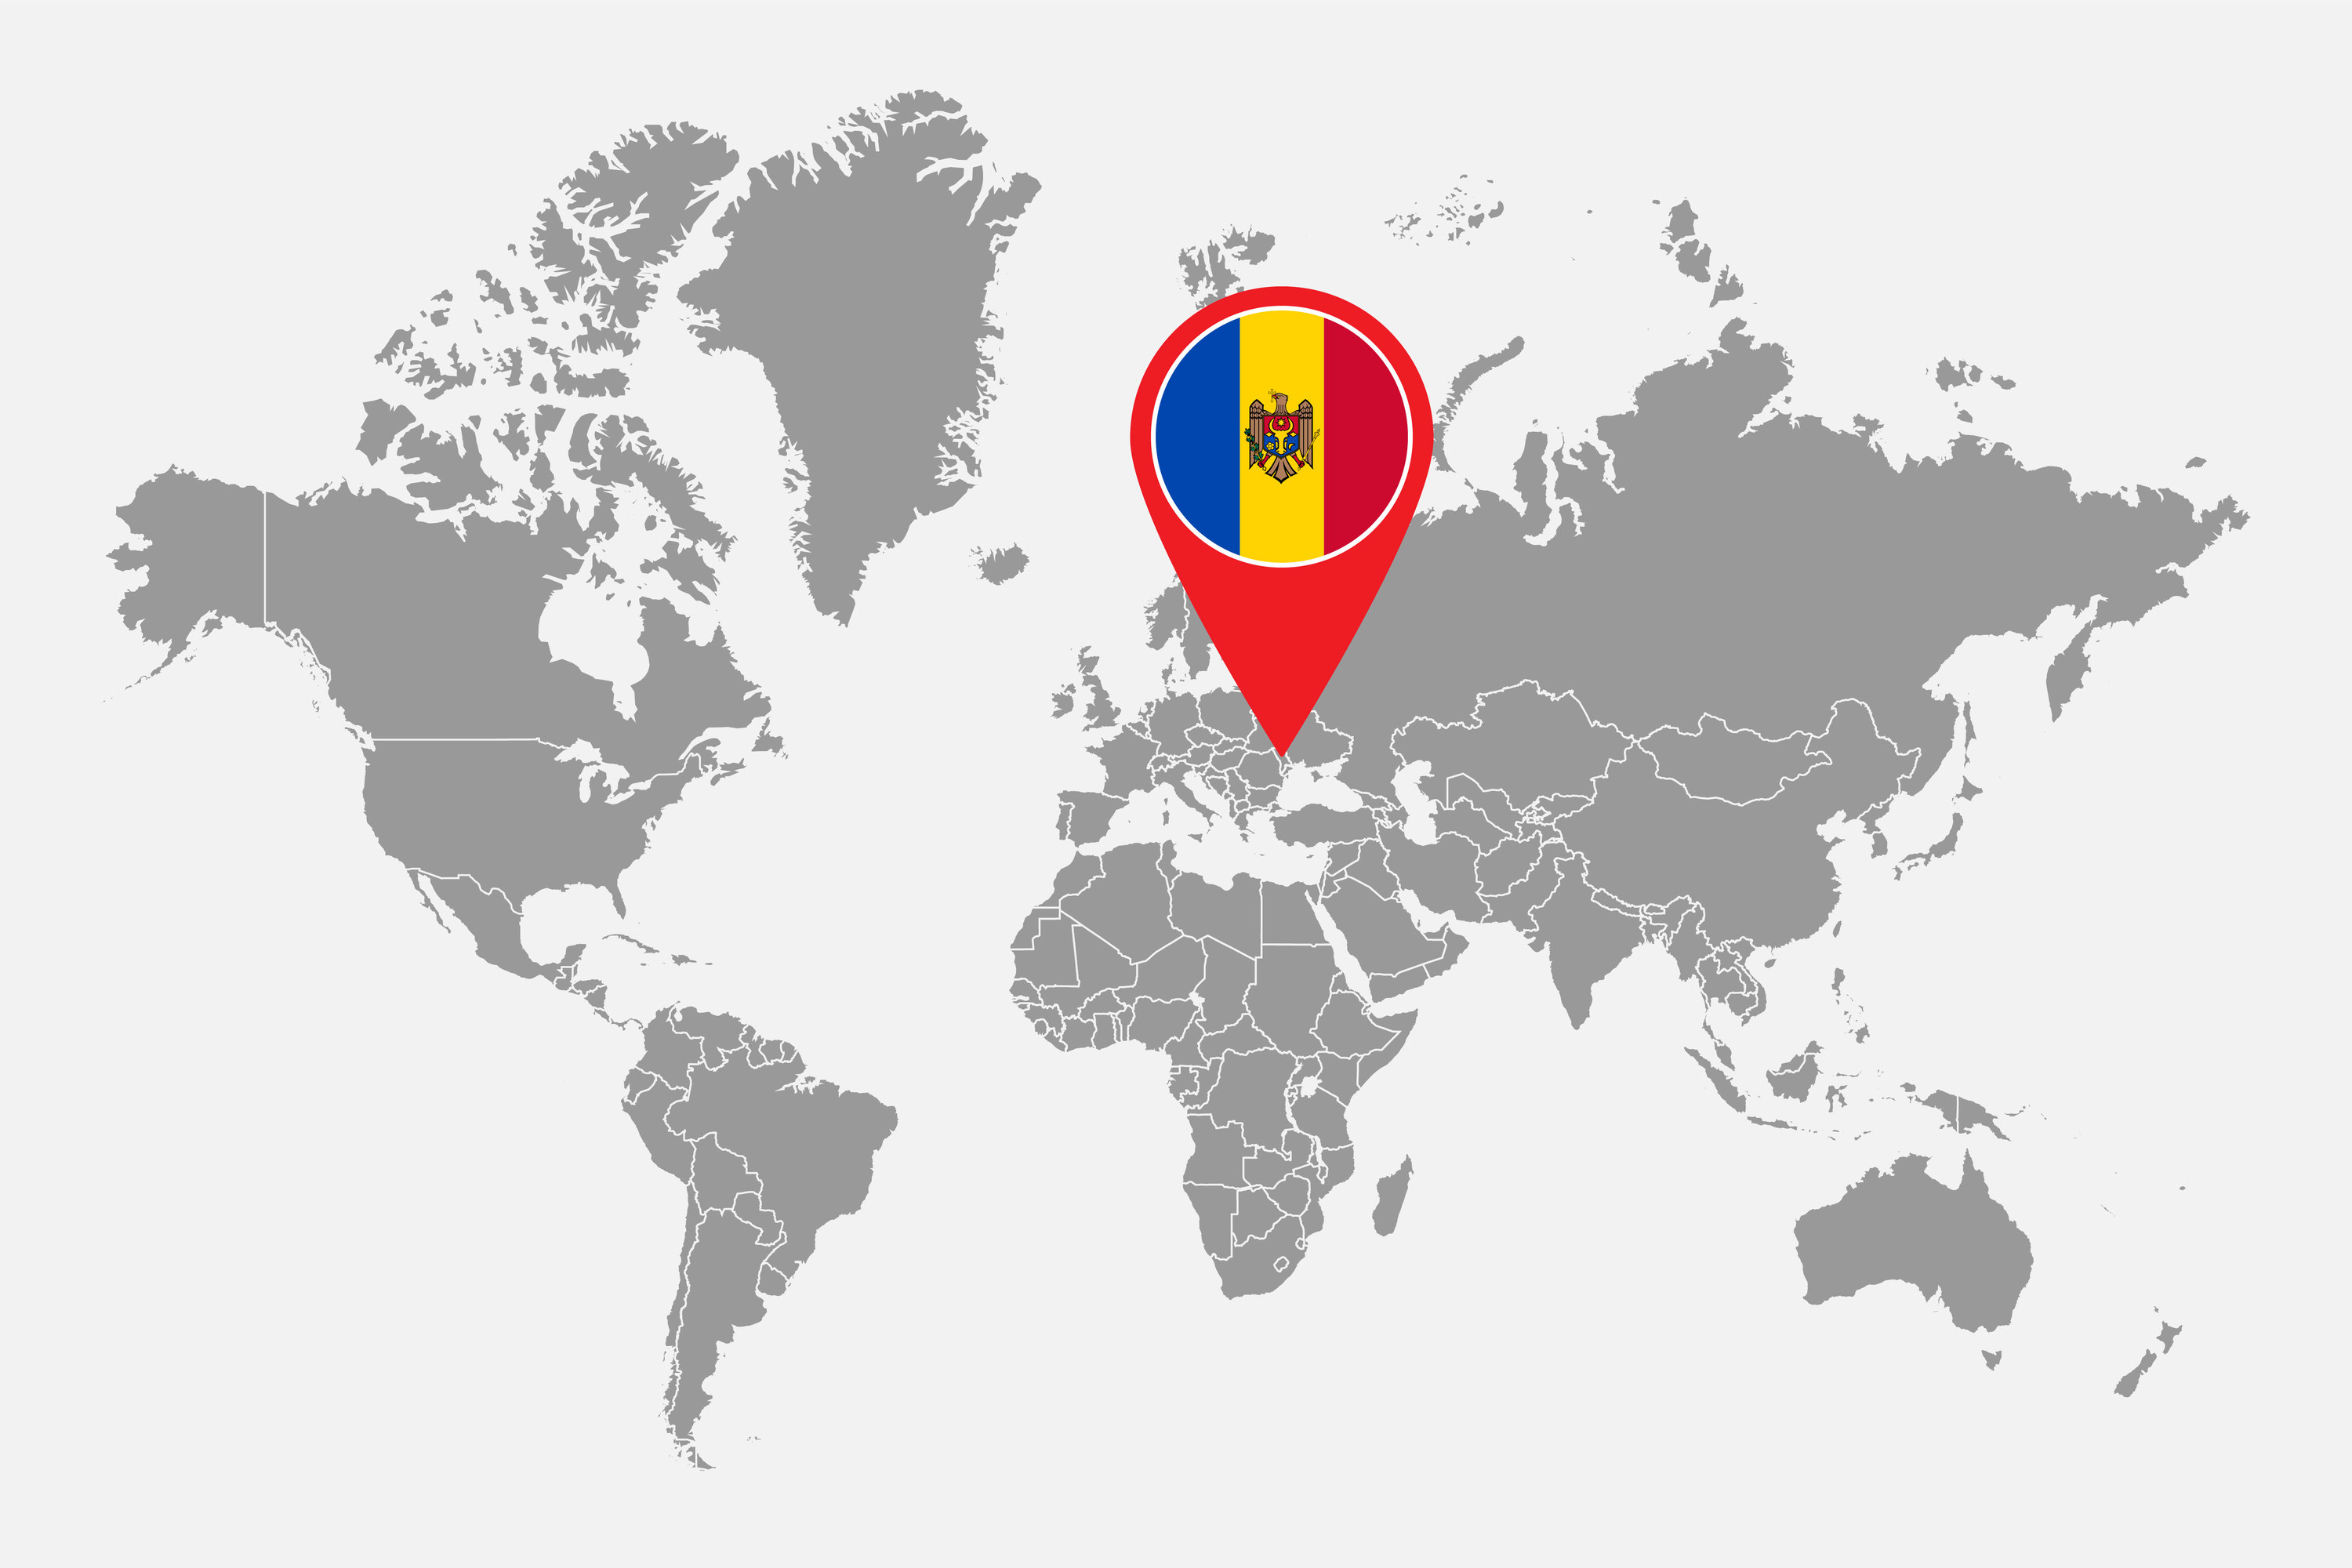 A world map with the Republic of Moldova indicated